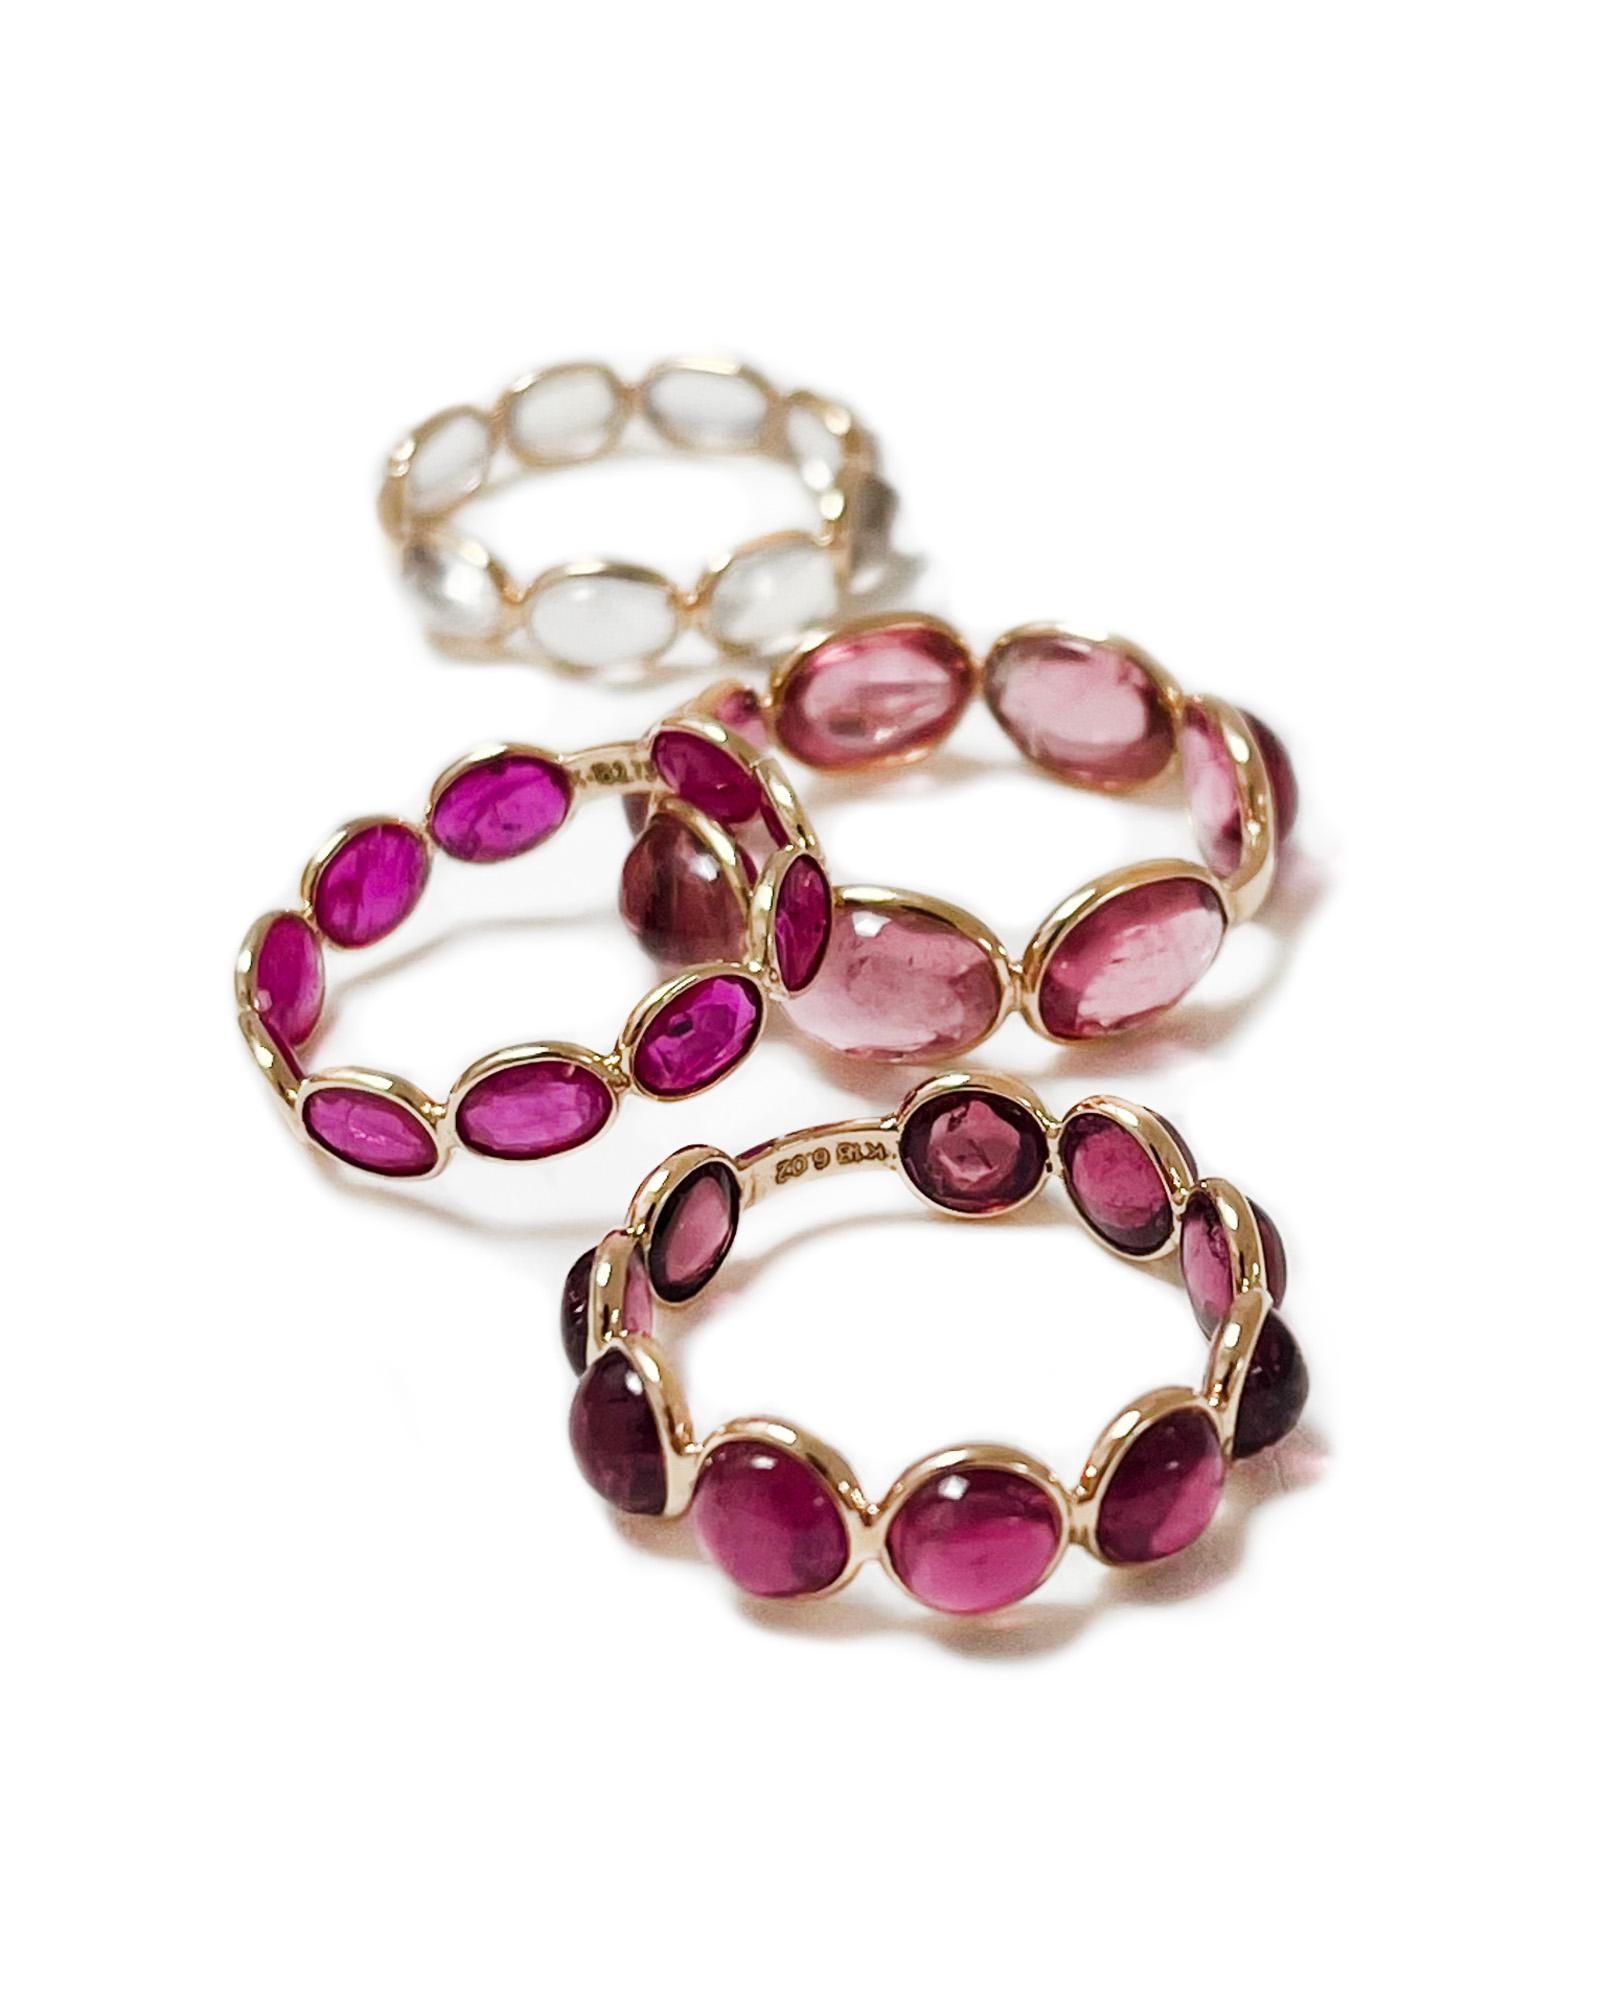 Intention: Stack it on

Dorian's Find: The Aura ring in rubellite is one our juiciest vintage finds. The rich berry color complements the 18k yellow gold beautifully, and the round cabochon cut means several stones can fit around the finger. The